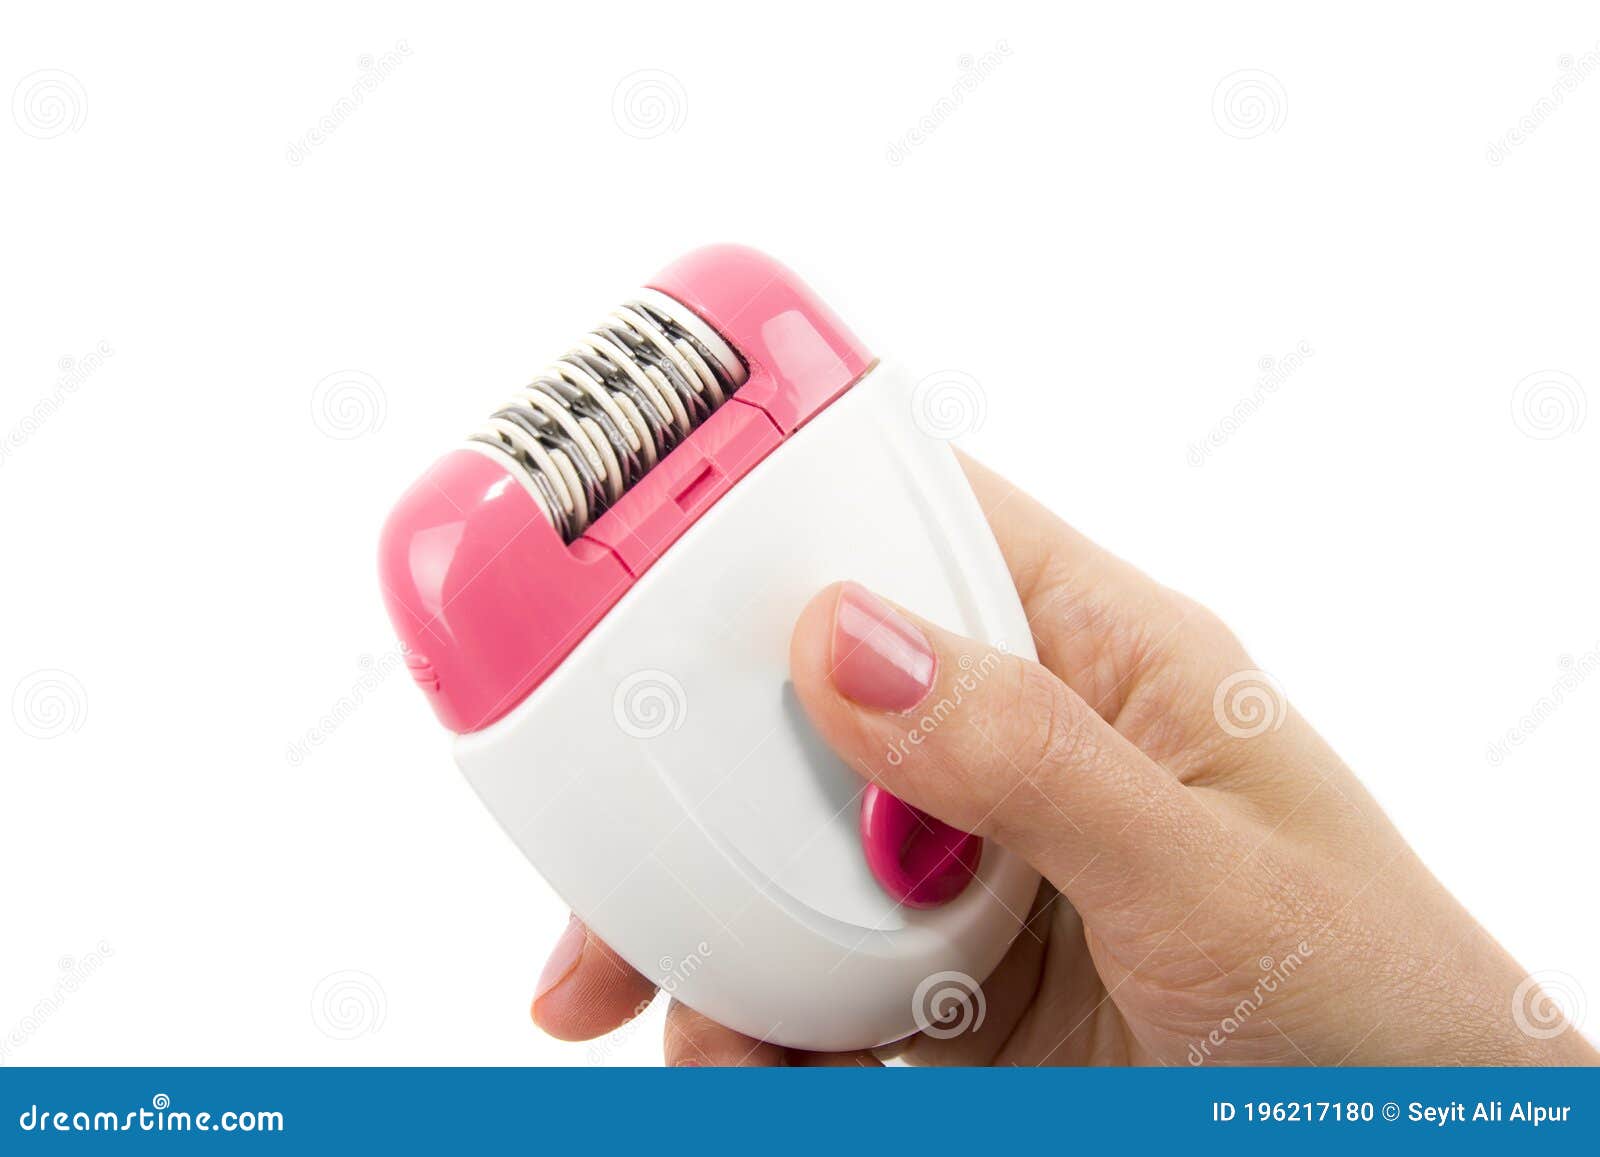 Hand and Hair Removal Device Stock Photo - Image of remove, close: 196217180